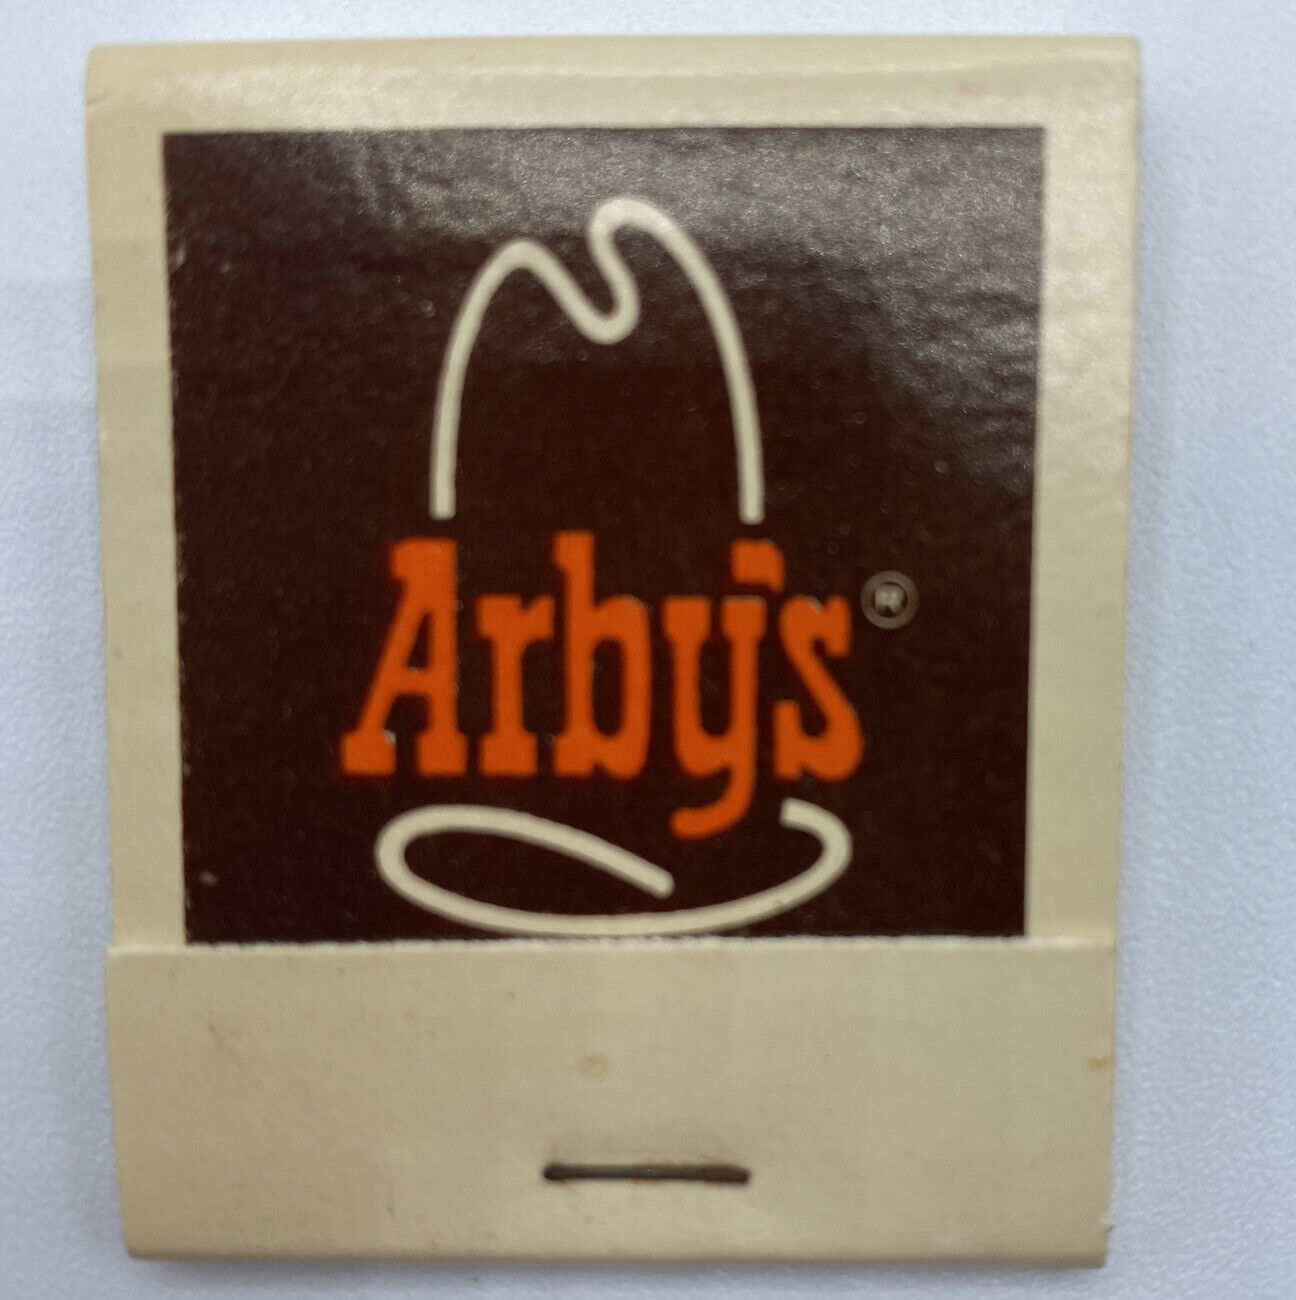 Vintage Arby’s Restaurant Advertising Matchbook - Never Used - Generic Location